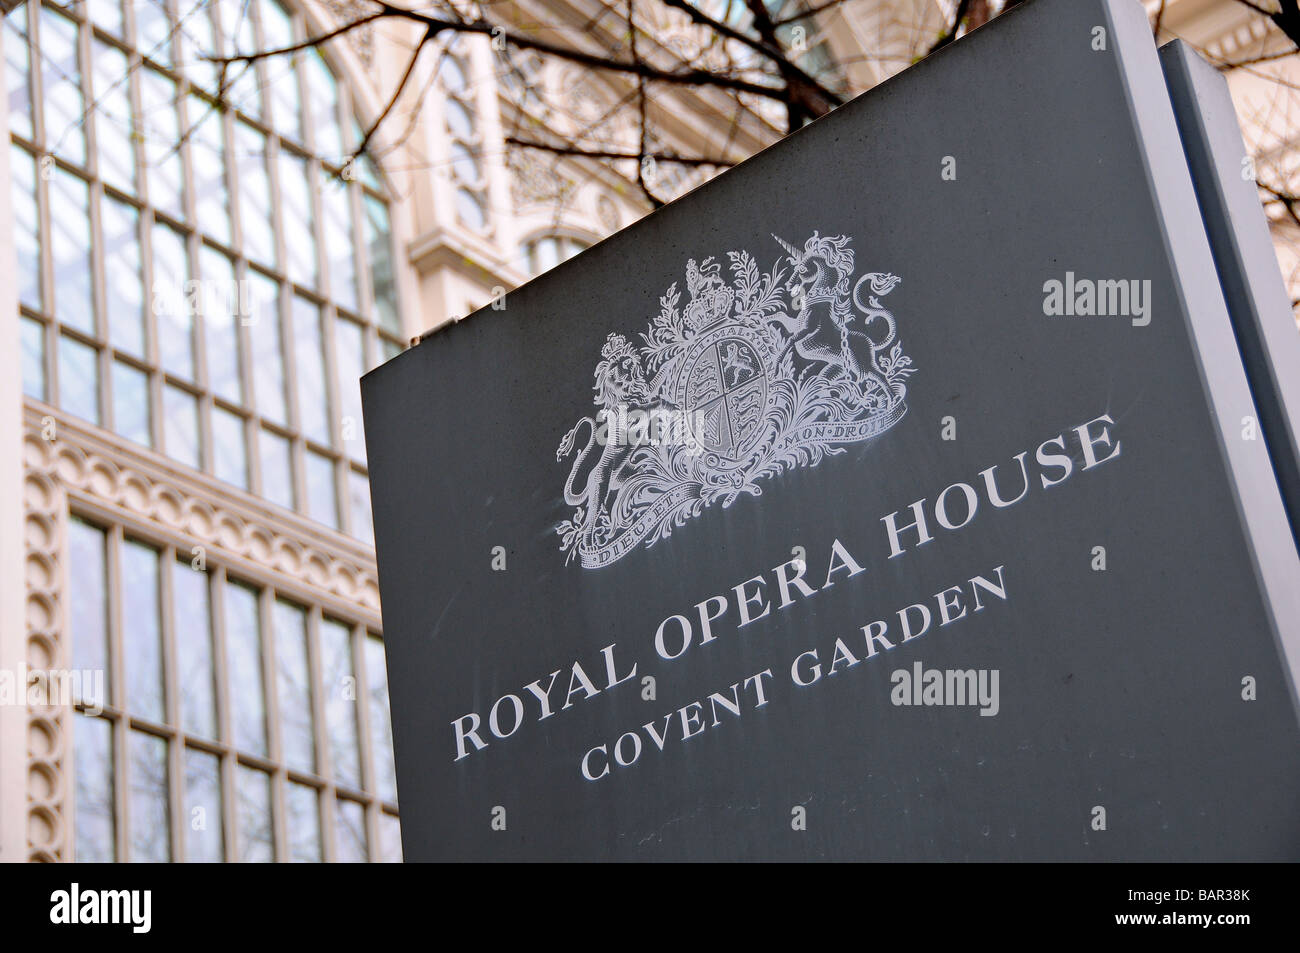 Royal Opera House, Covent Garden, London, UK Banque D'Images